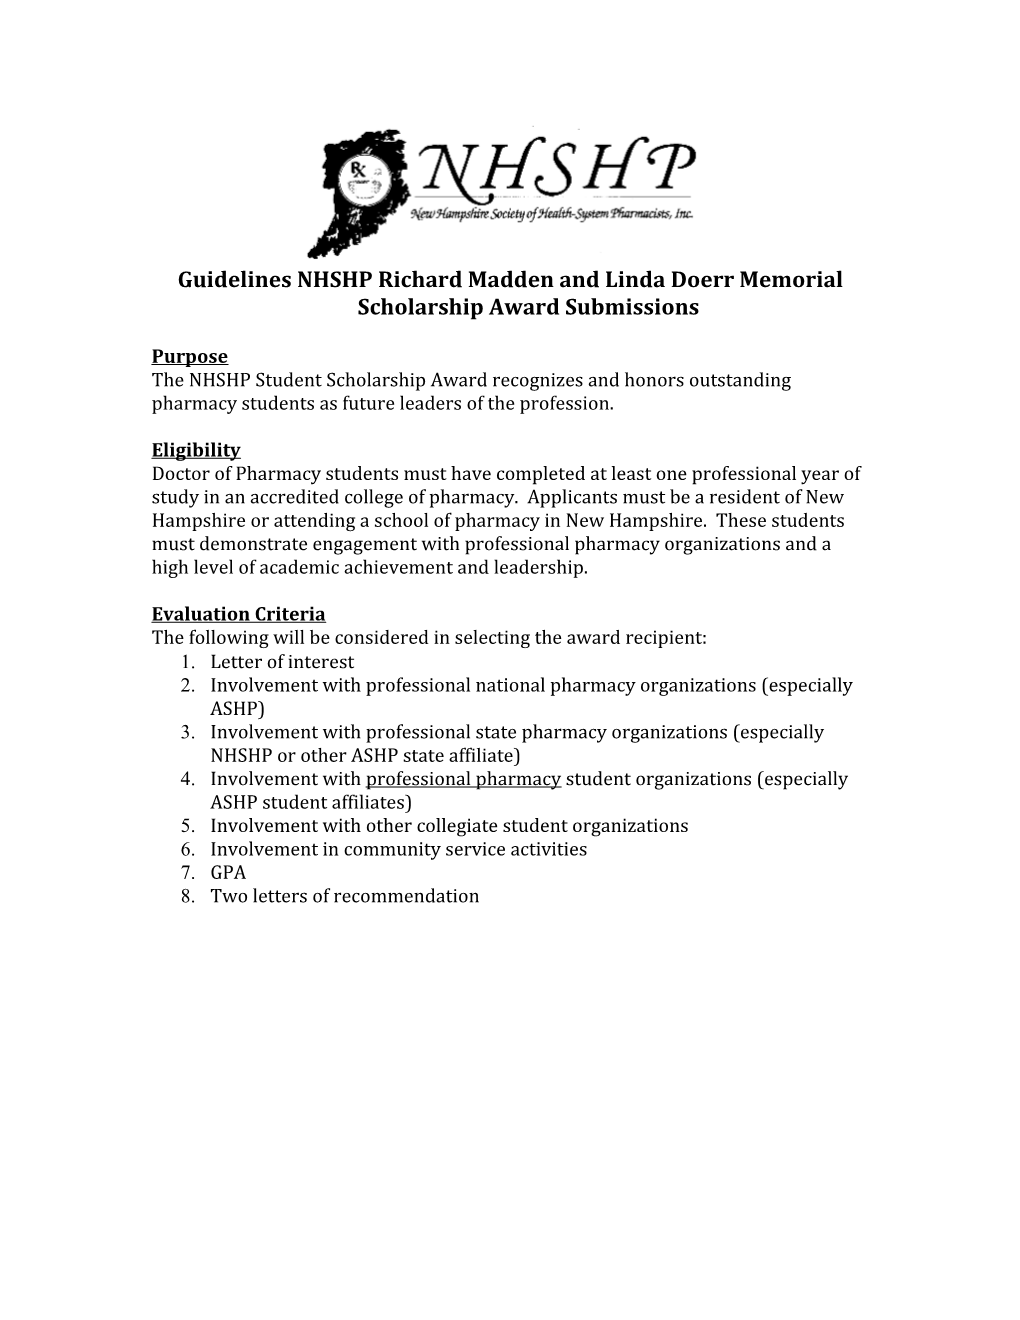 Instructions for Medication Safety Award Submissions